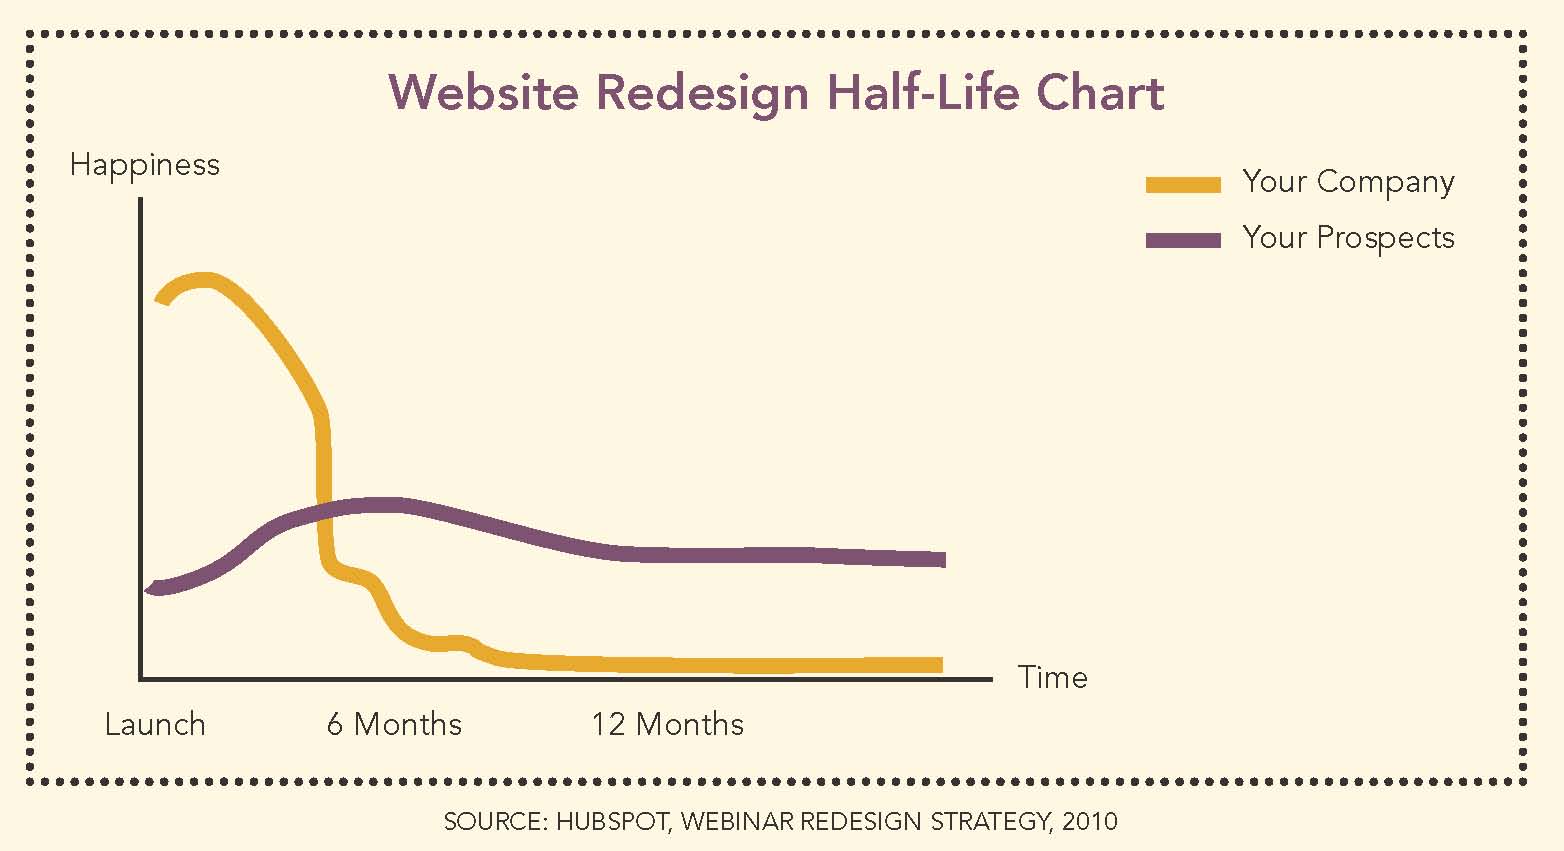 The Only Three Reasons for Website Redesign